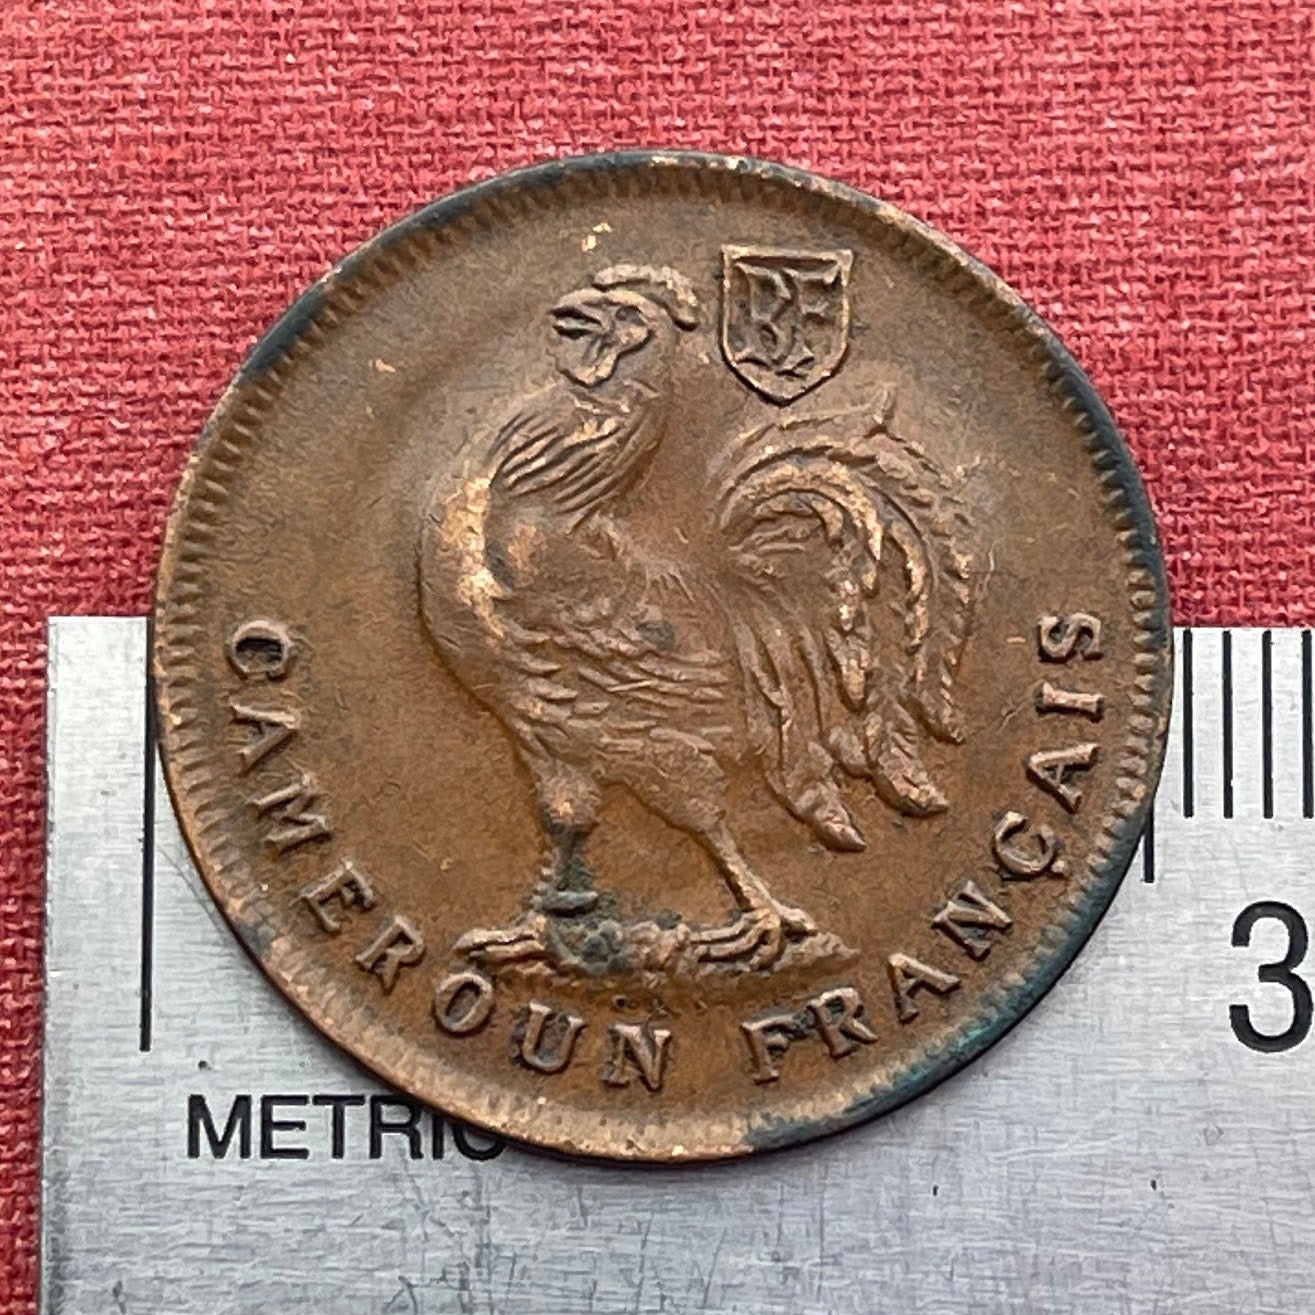 Gallic Rooster 1 Franc Chantecler & Free French Cross of Lorraine French Cameroon Authentic Coin Money for Jewelry (Le Coq Francais) 1943